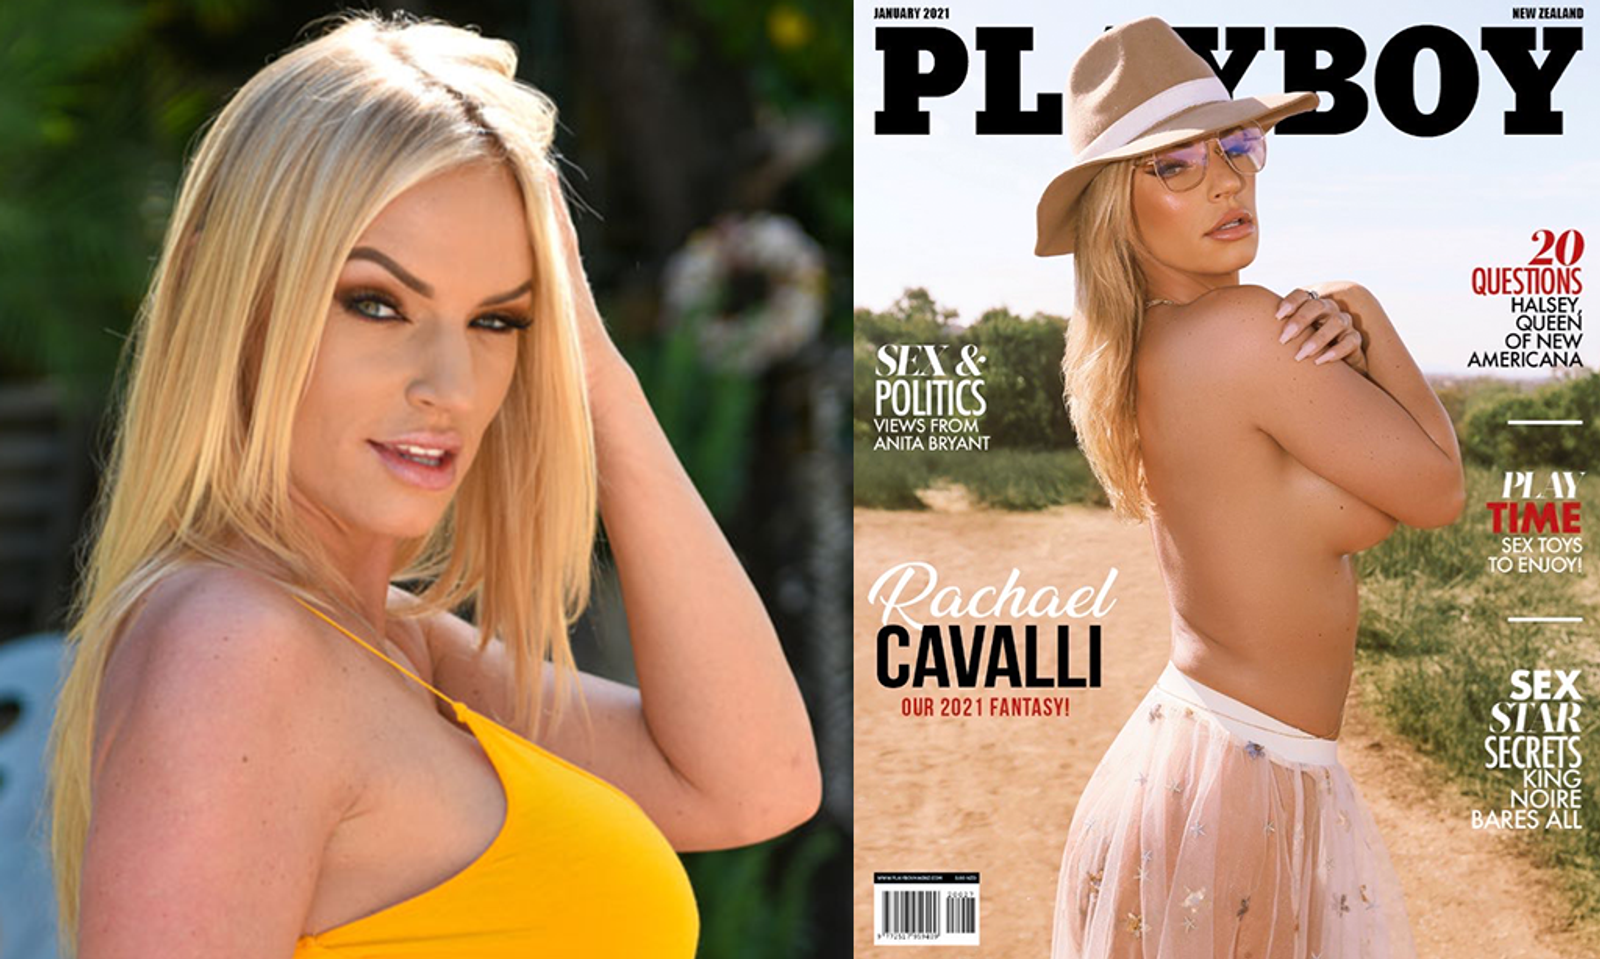 Rachael Cavalli Takes the Cover of January's Playboy New Zealand